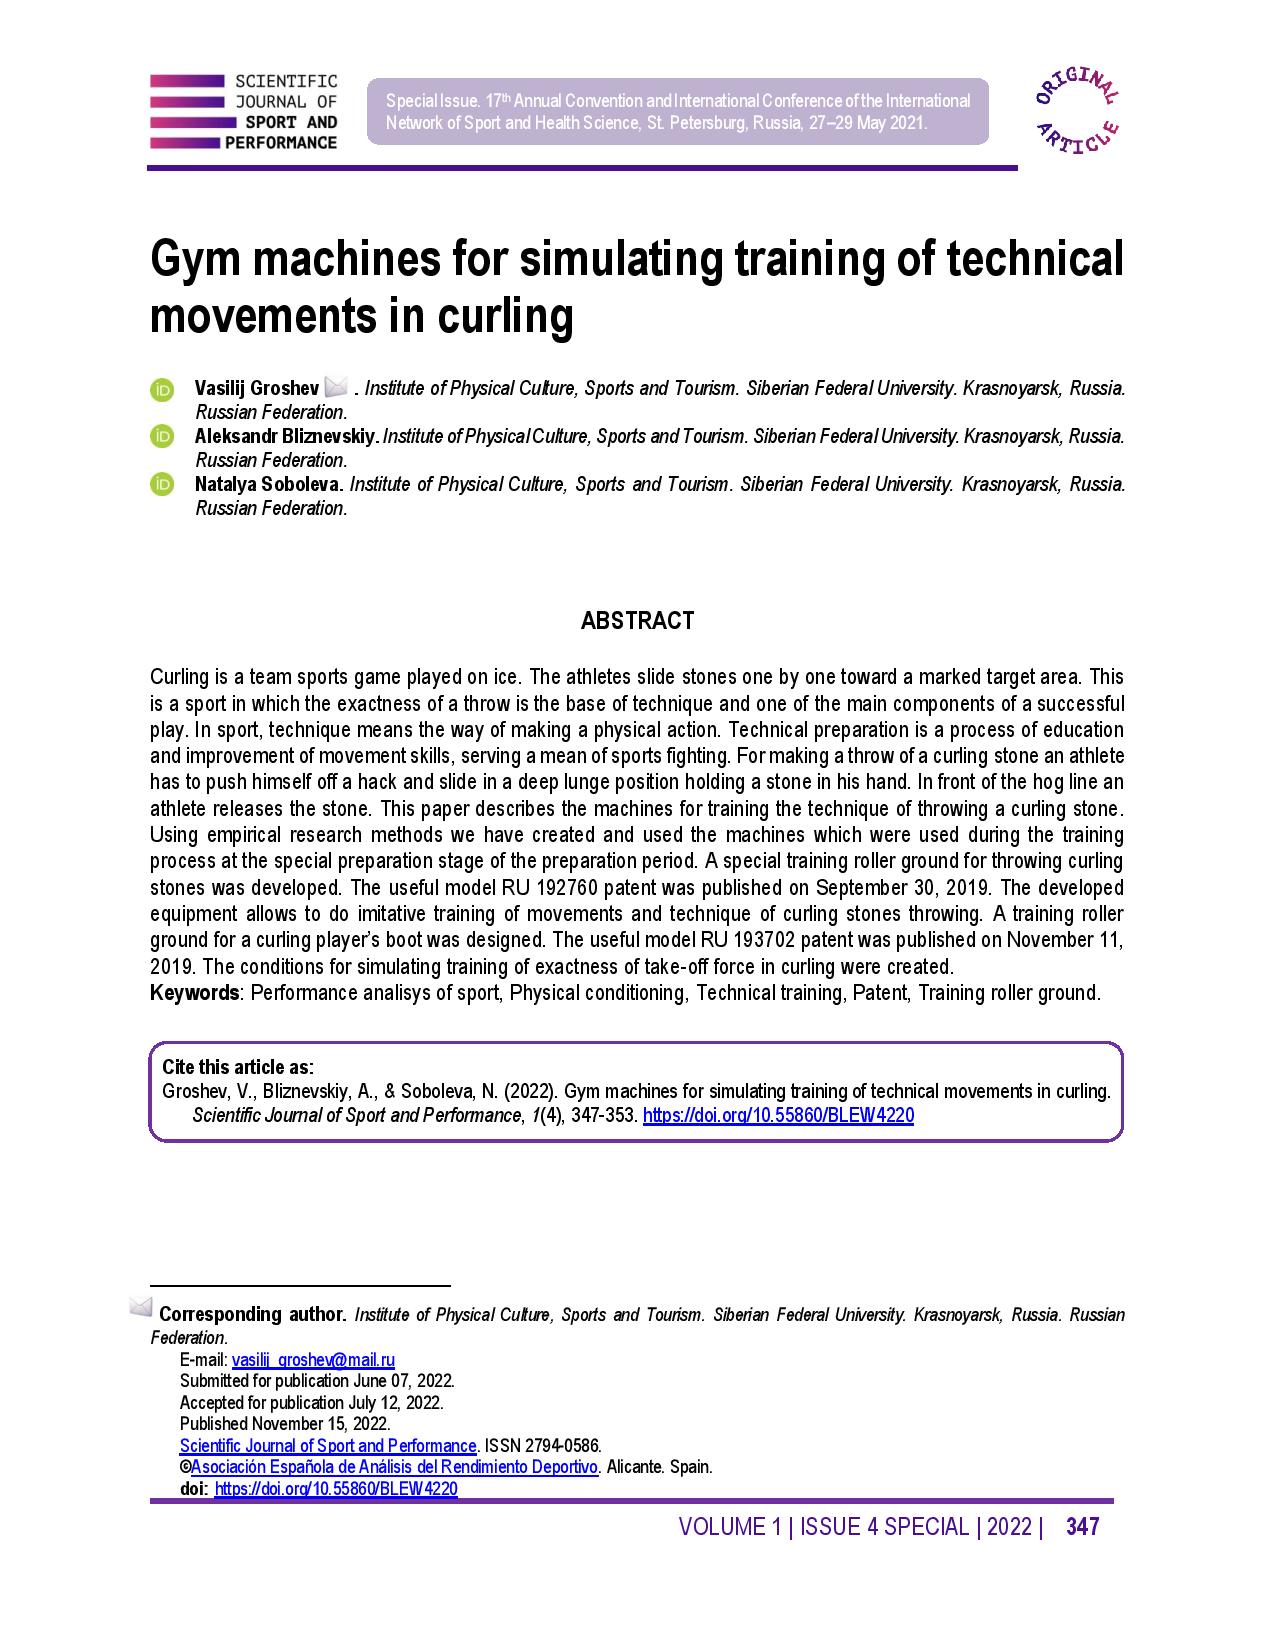 Gym machines for simulating training of technical movements in curling